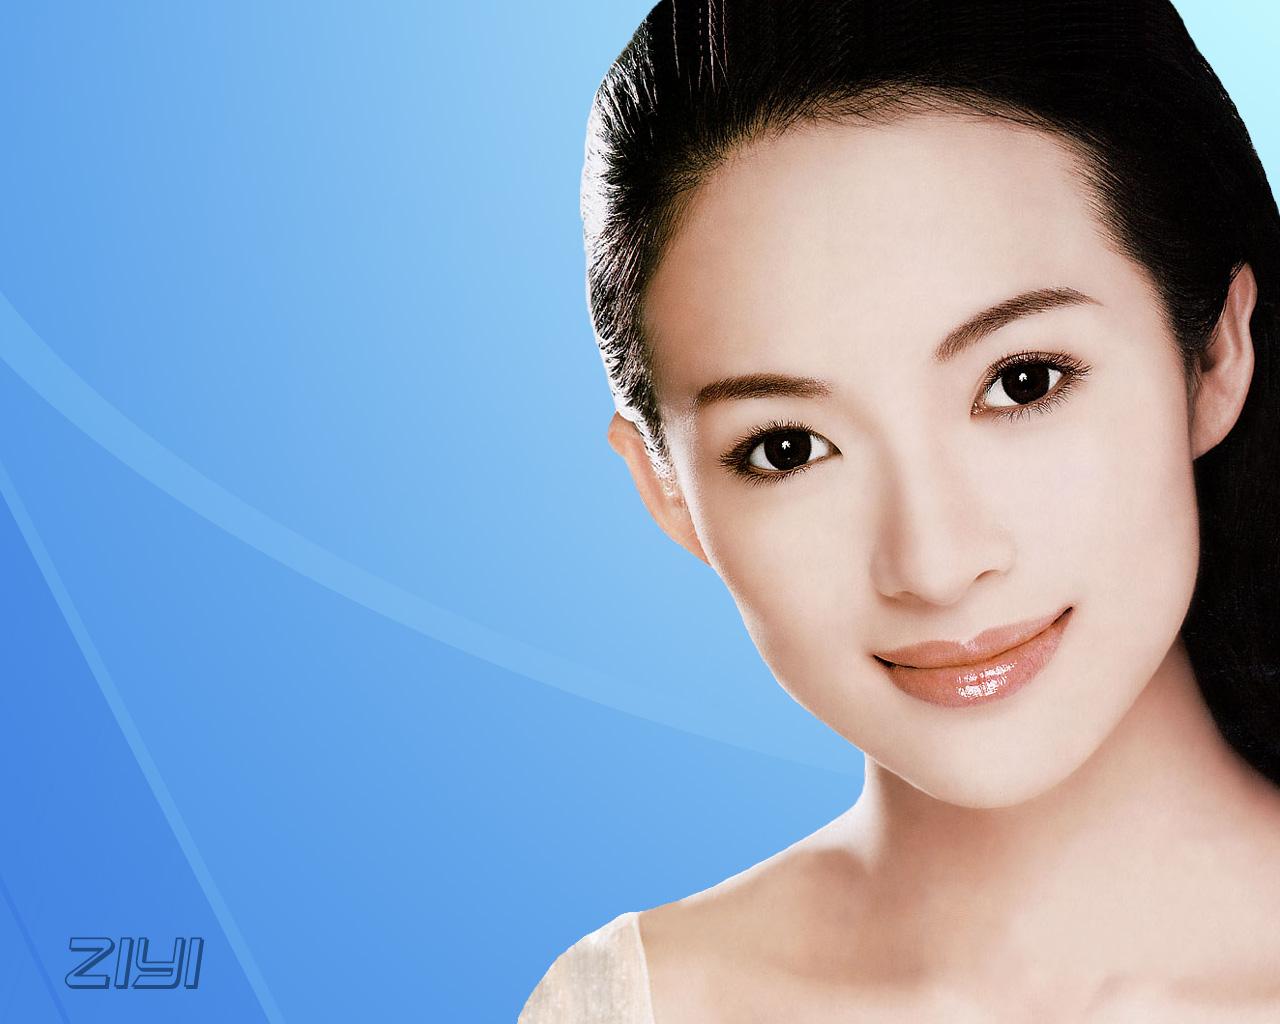 Zhang ziyi - (#53161) - High Quality and Resolution Wallpapers on ...